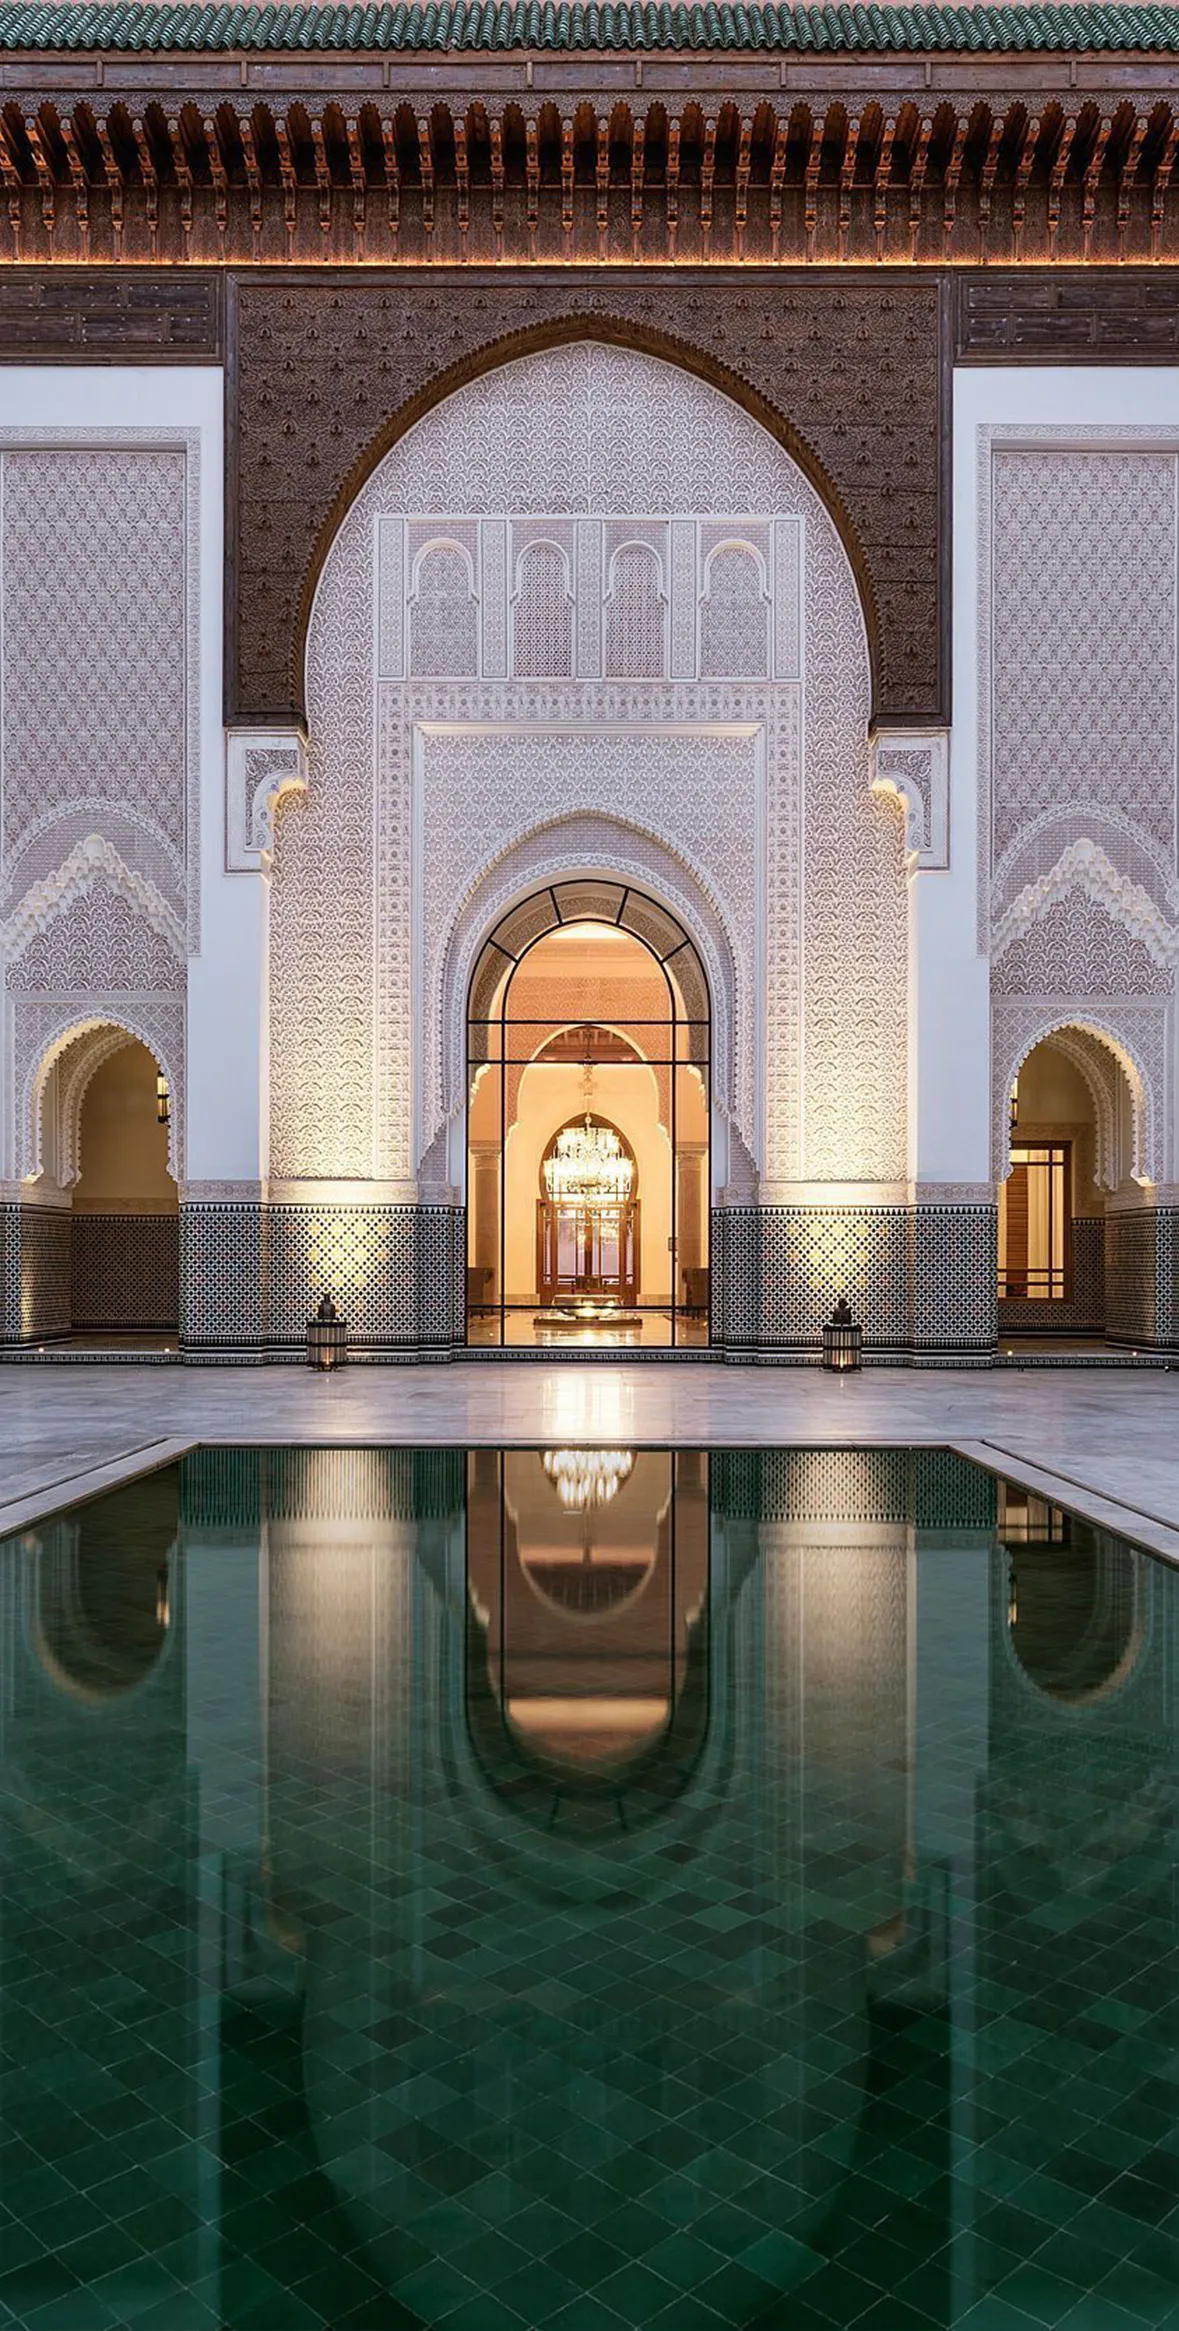 An image of a large pool of calm water situated inside a courtyard with exquisite Moorish architecture at The Oberoi hotel in Marrakech, Morocco.